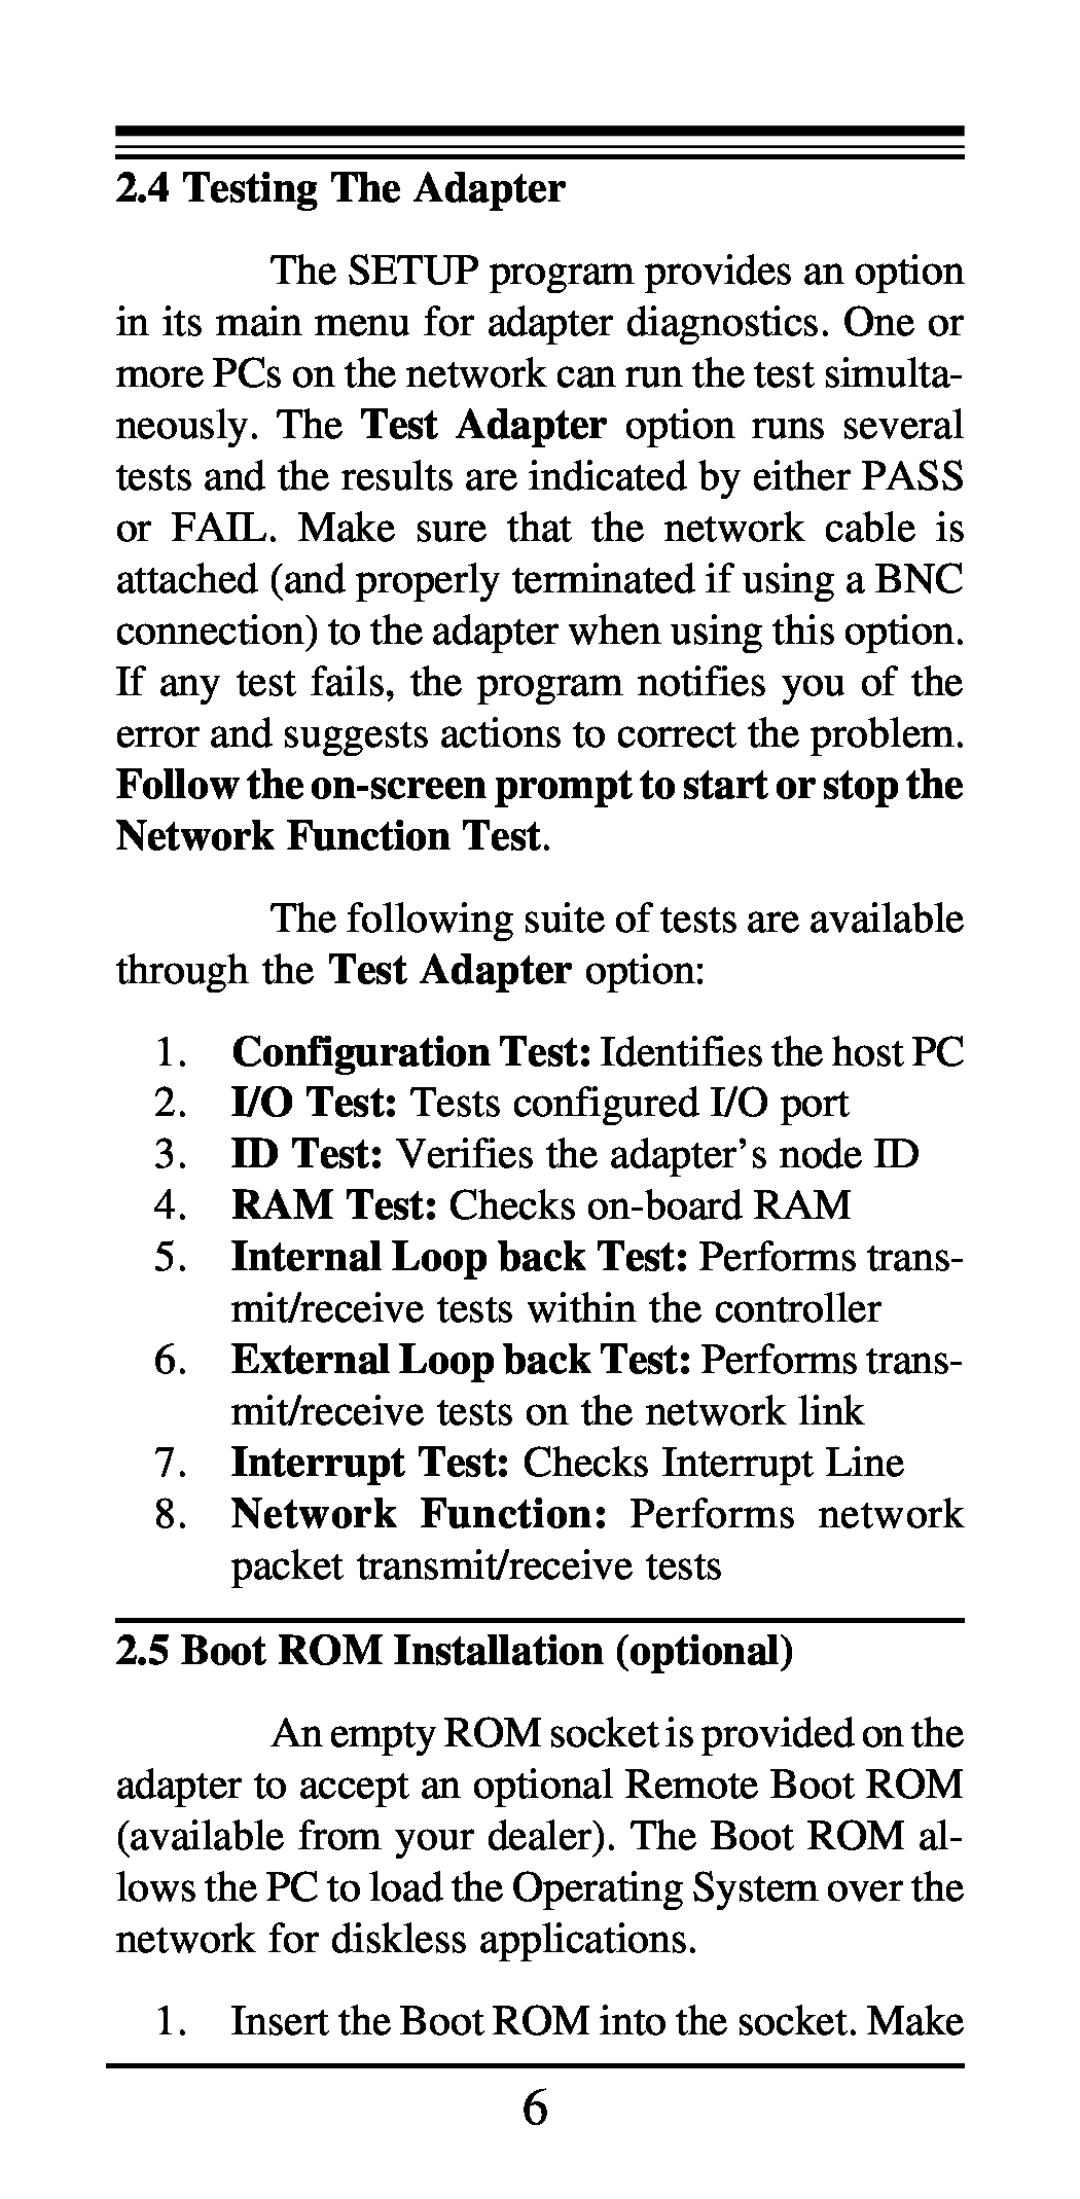 MaxTech NX-16 manual Testing The Adapter, Network Function Performs network packet transmit/receive tests 